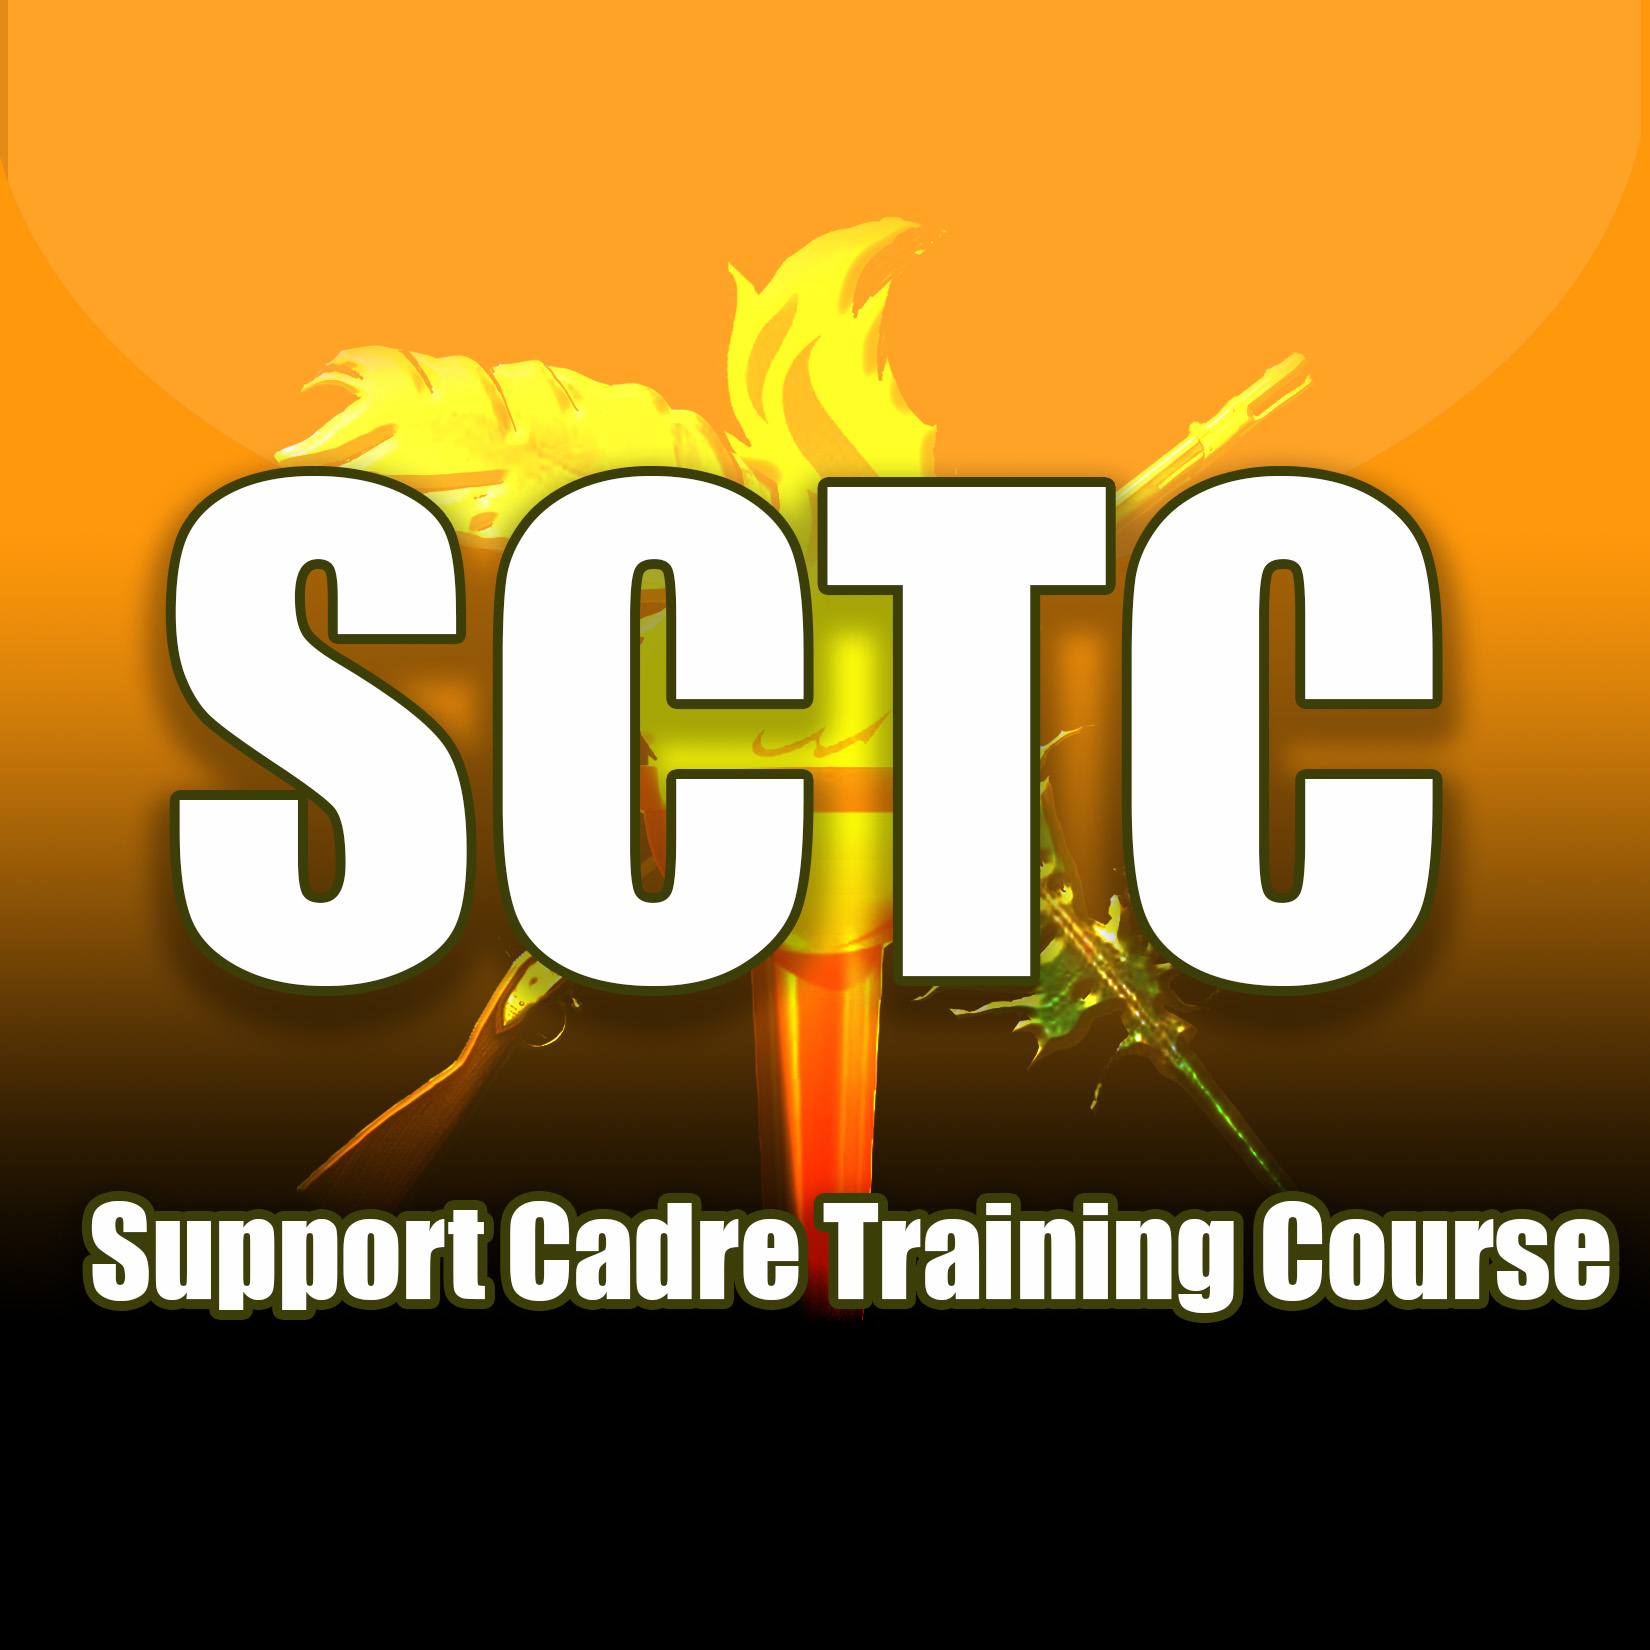 Support Cadre Training Course